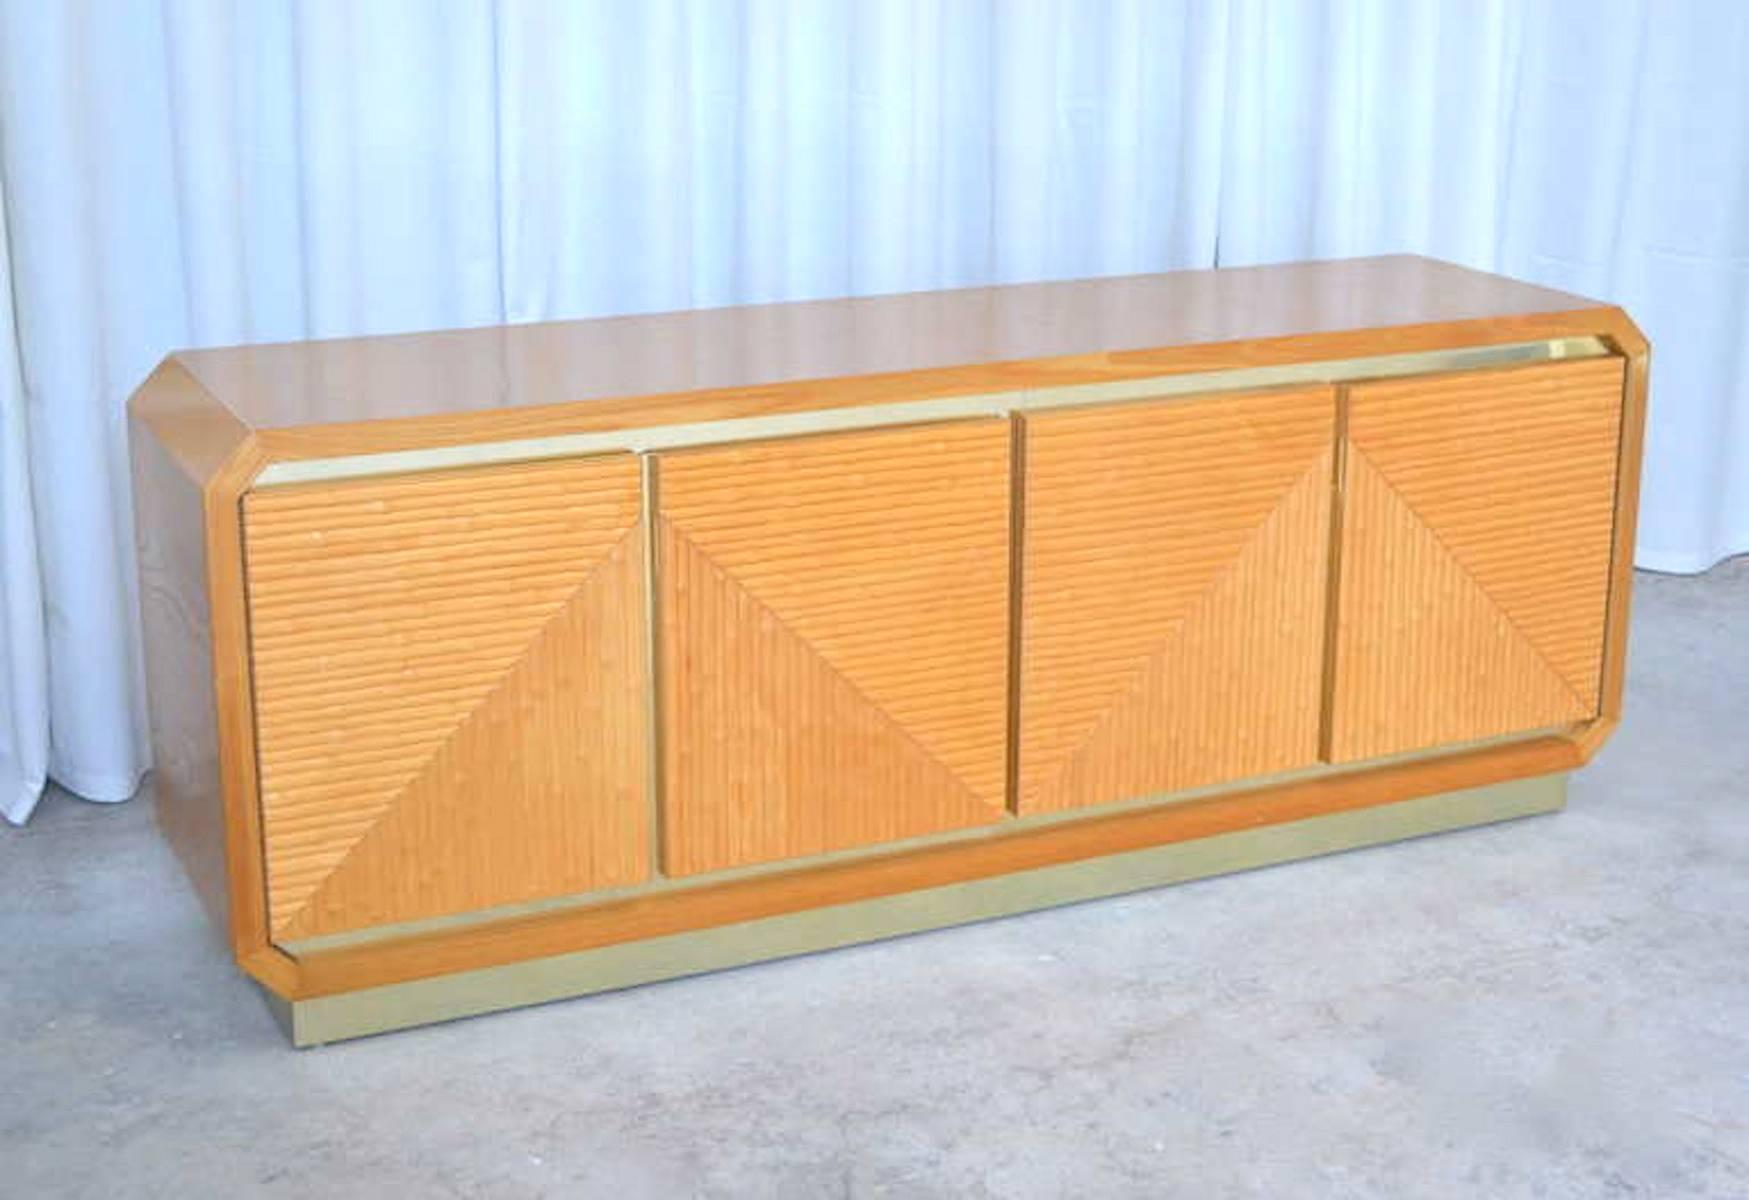 Striking Post-Modern faux bamboo sideboard with brass accents, circa 1970s. This handsome wood credenza consists of four doors decorated with faux carved bamboo geometric panels accentuated with brass details.  This highly decorative cabinet is